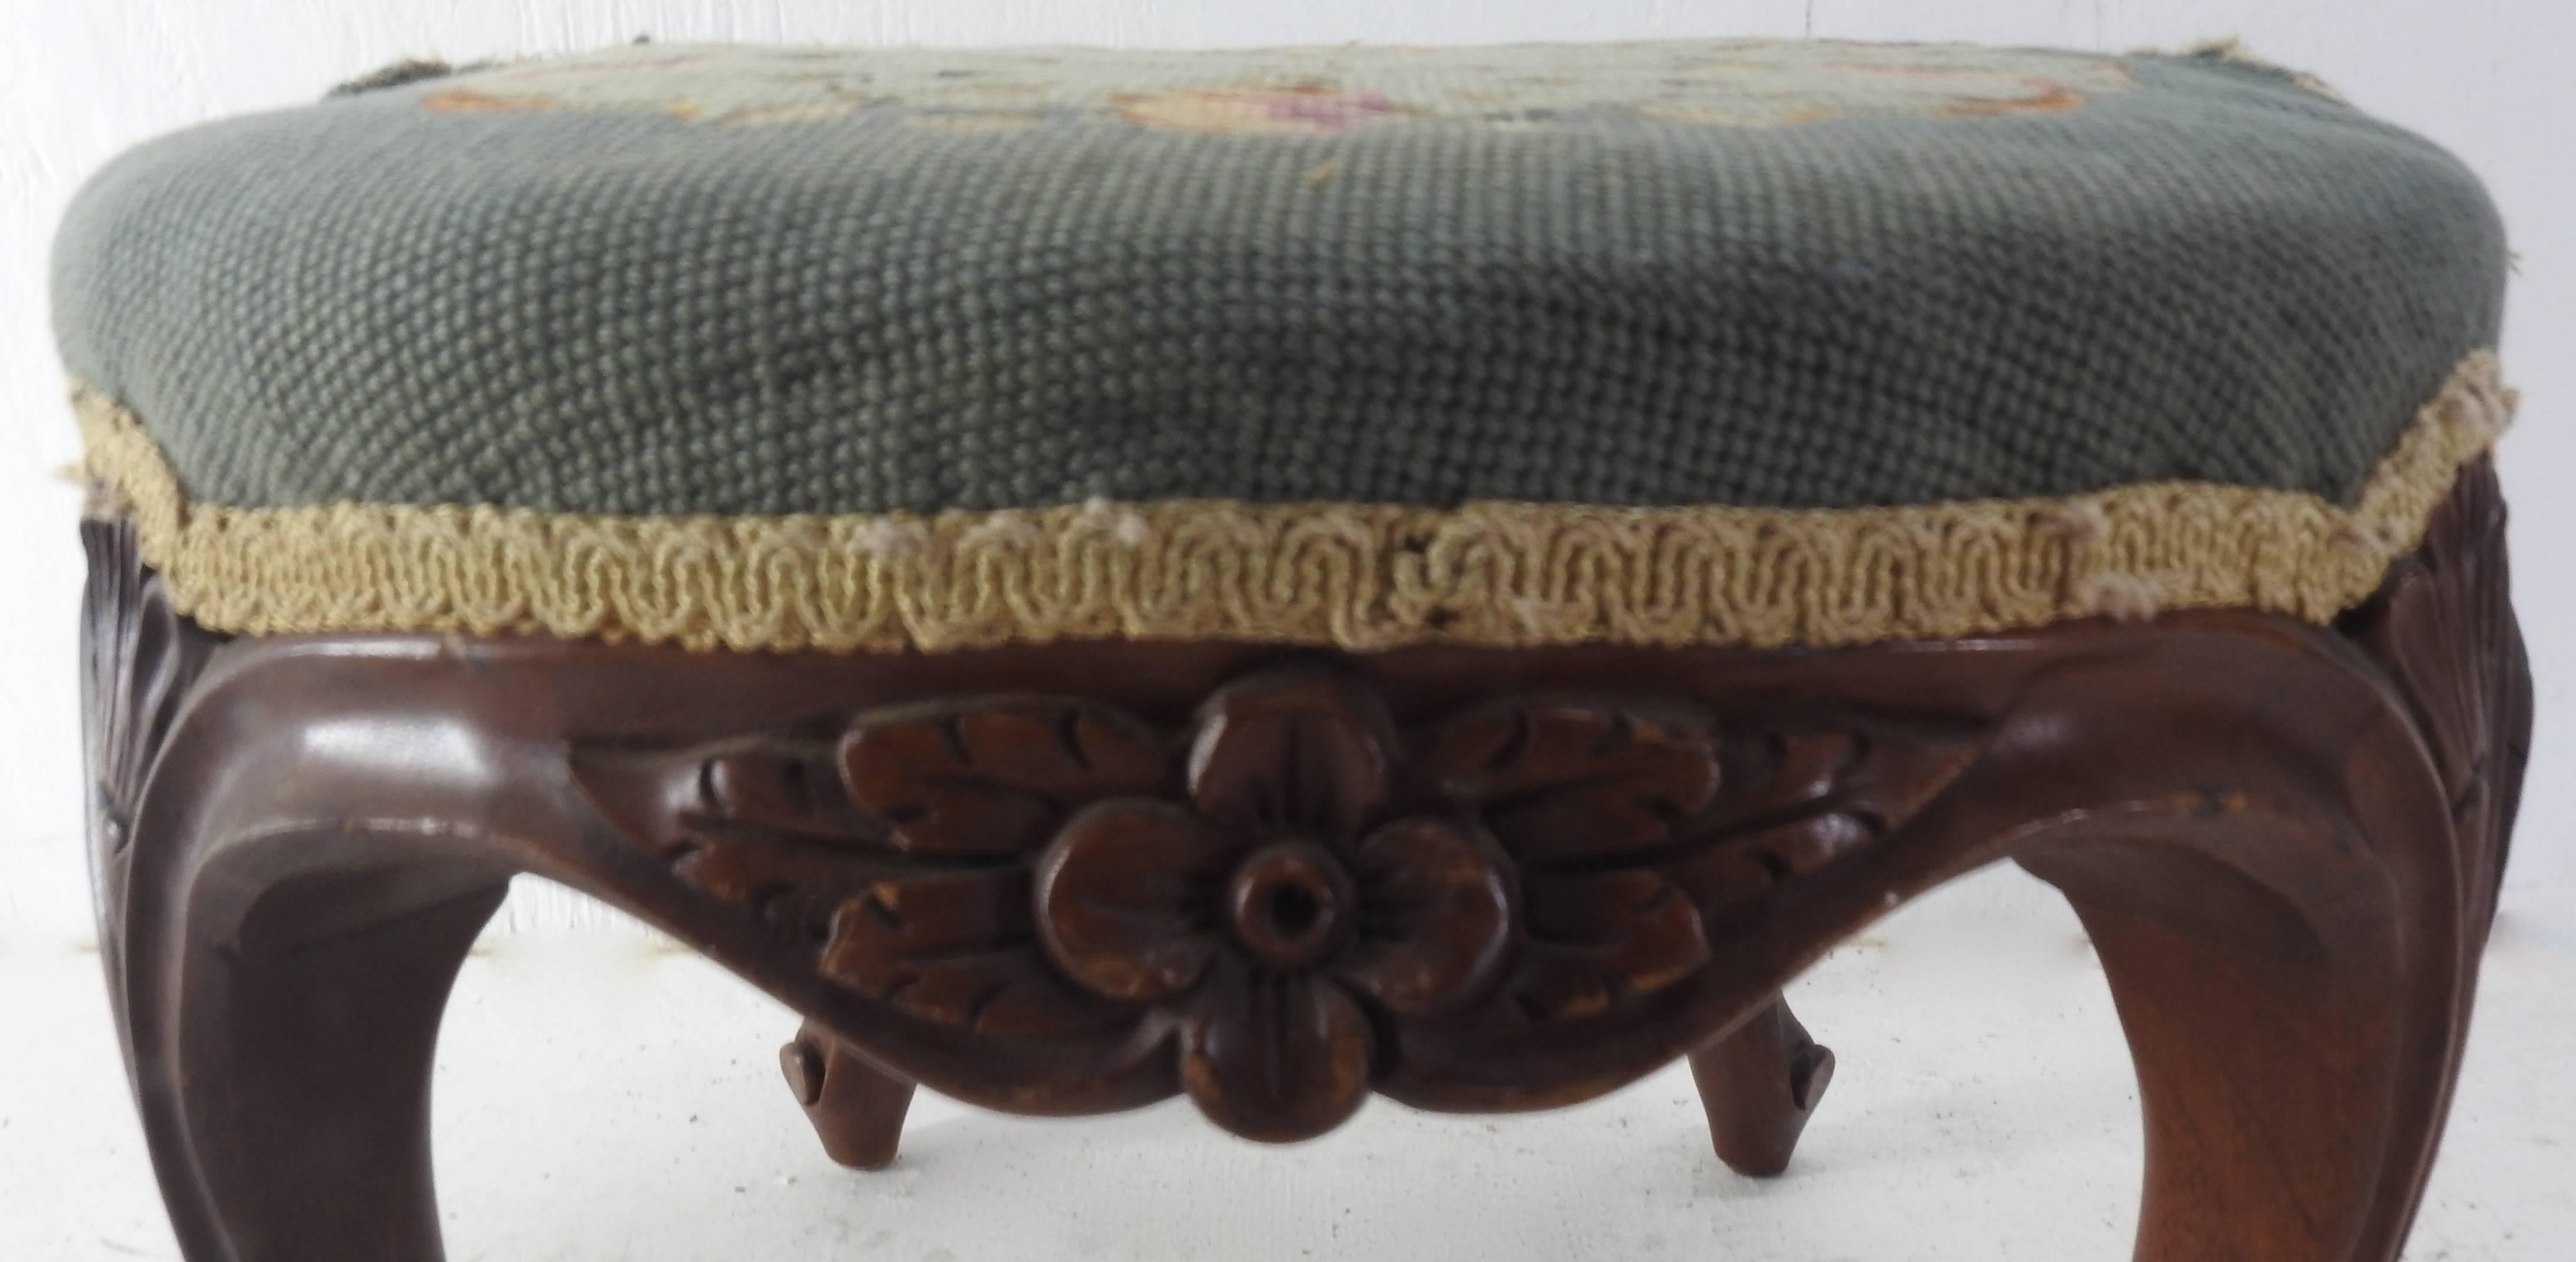 Soft flowers in a light blue centre grace the top of this needlepoint stool from America. The perimeter is done in a slightly deeper hue of blue and is surrounded by cream colored gimp. The wooden legs curve upward to support the design. There is a